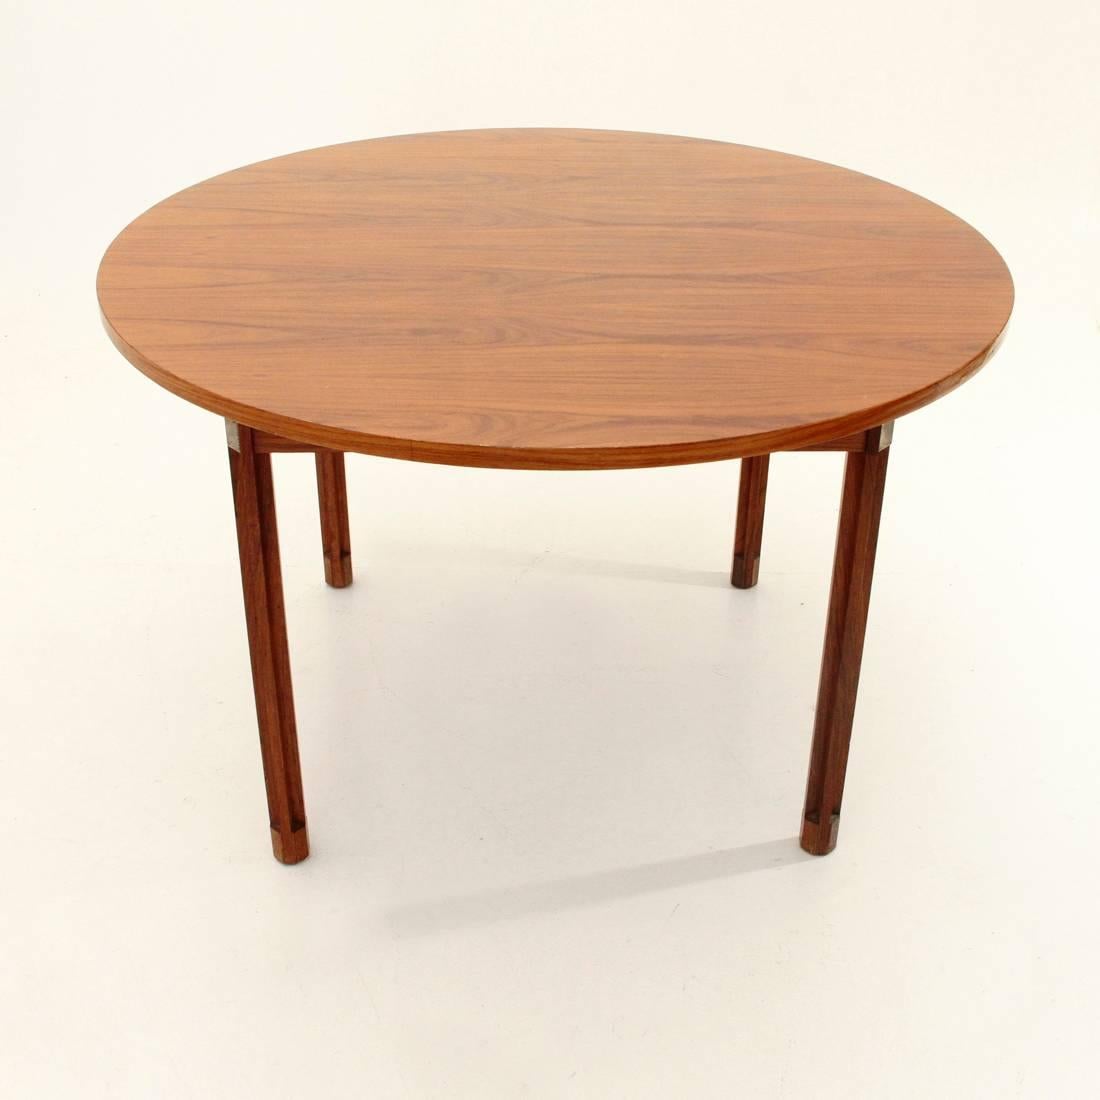 Table produced by 3V arredamenti and designed by Georges Coslin in the '60s.
Legs with cross profile and octagonal foots
Aluminum plaque to the inserting legs.
Veneered wood top.
Good general conditions of the structure, signs of use and traces of